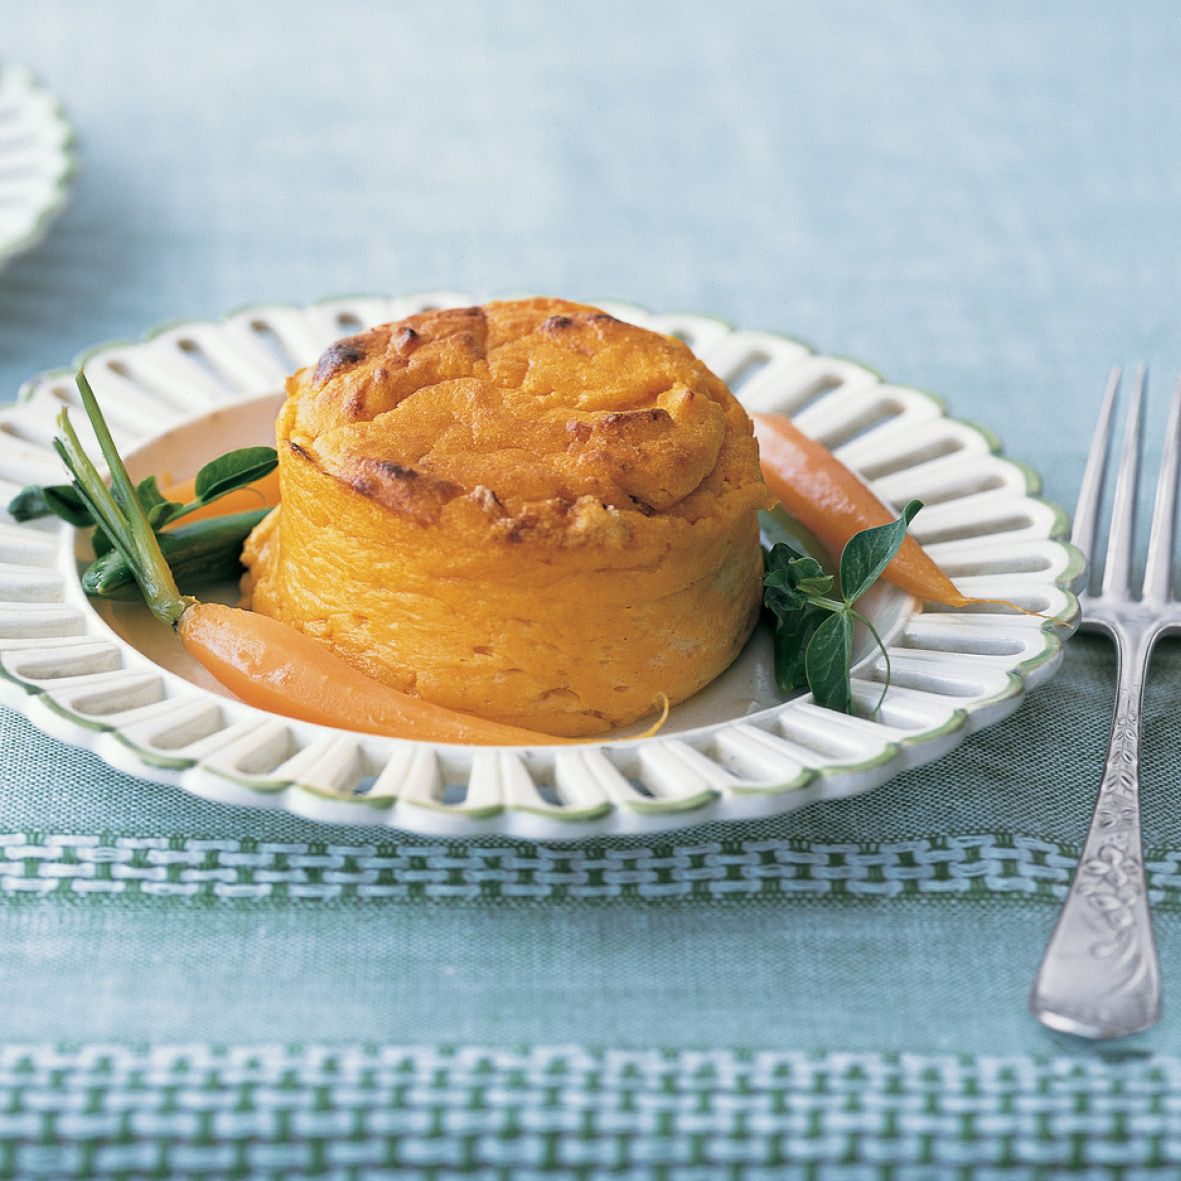 Carrot pudding soufflé with buttered vegetables.jpg